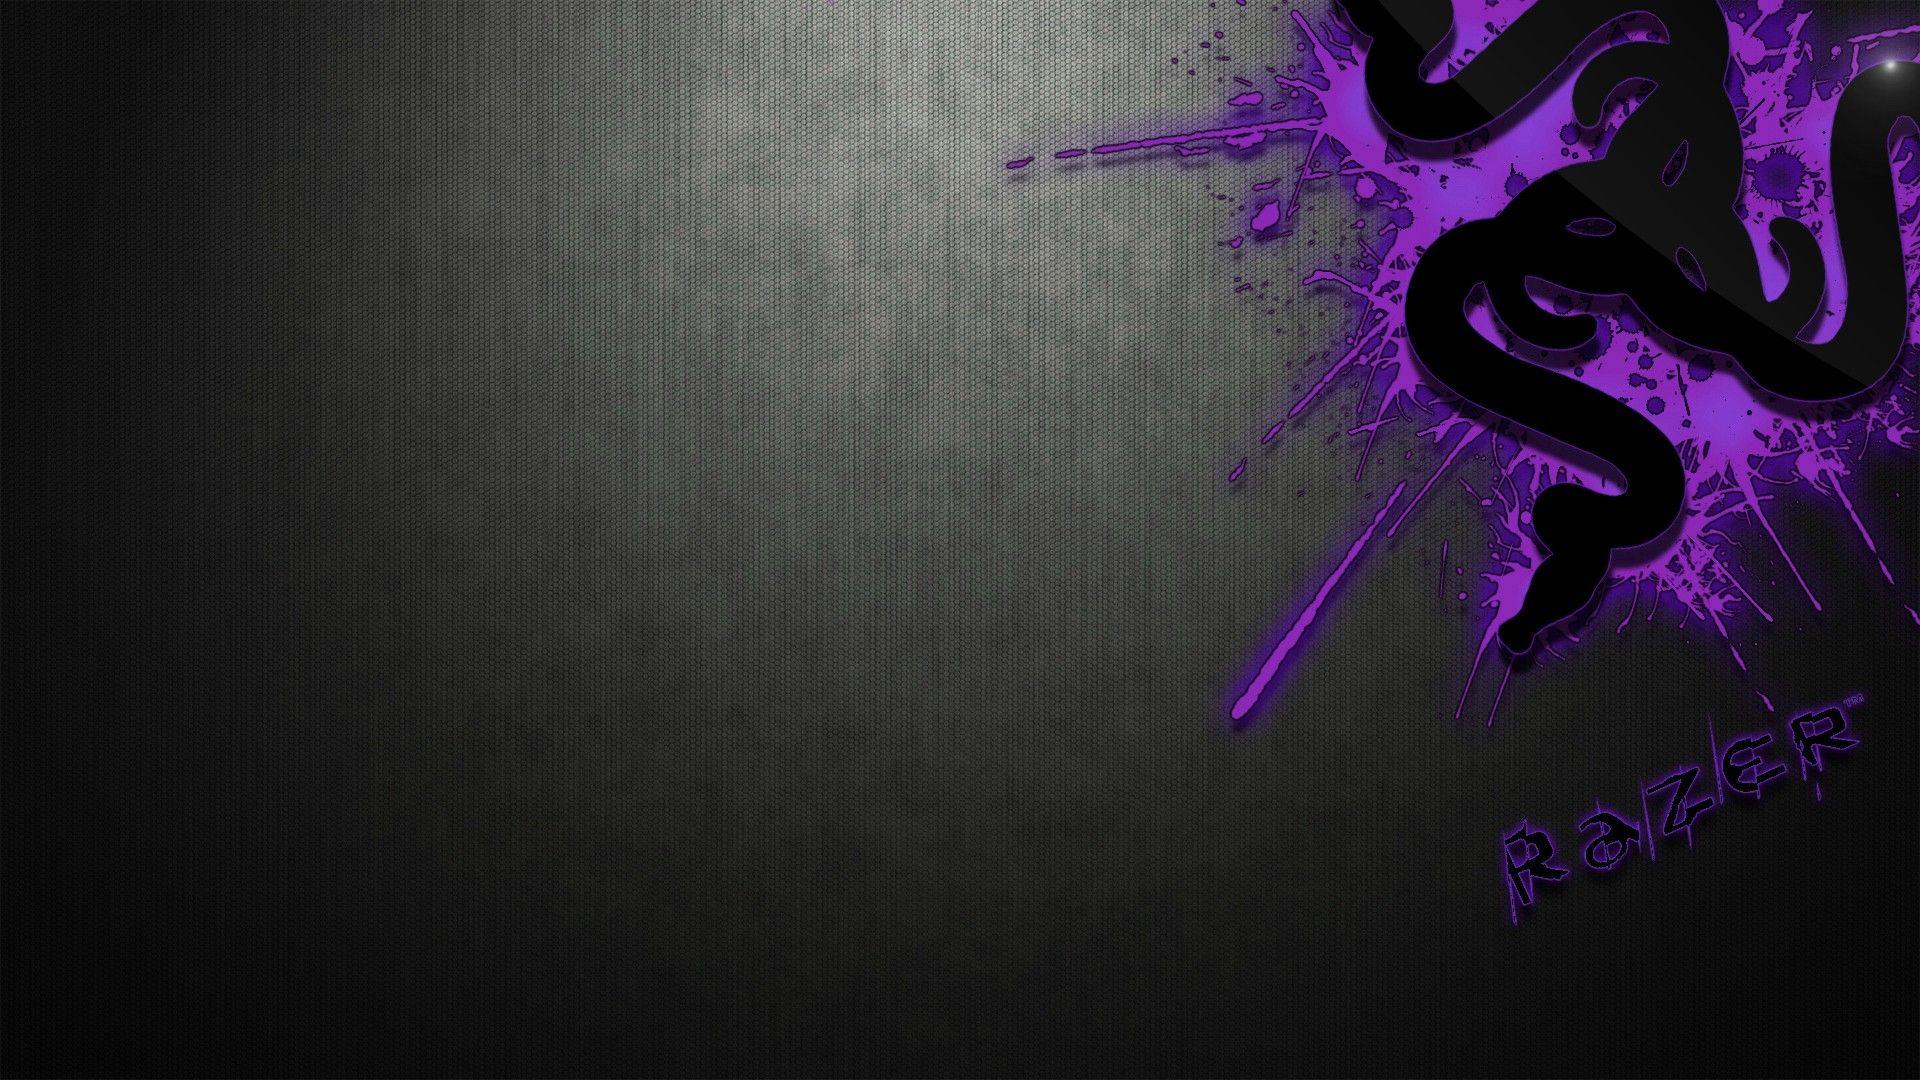 Purple And White Gaming Wallpapers Top Free Purple And White Gaming